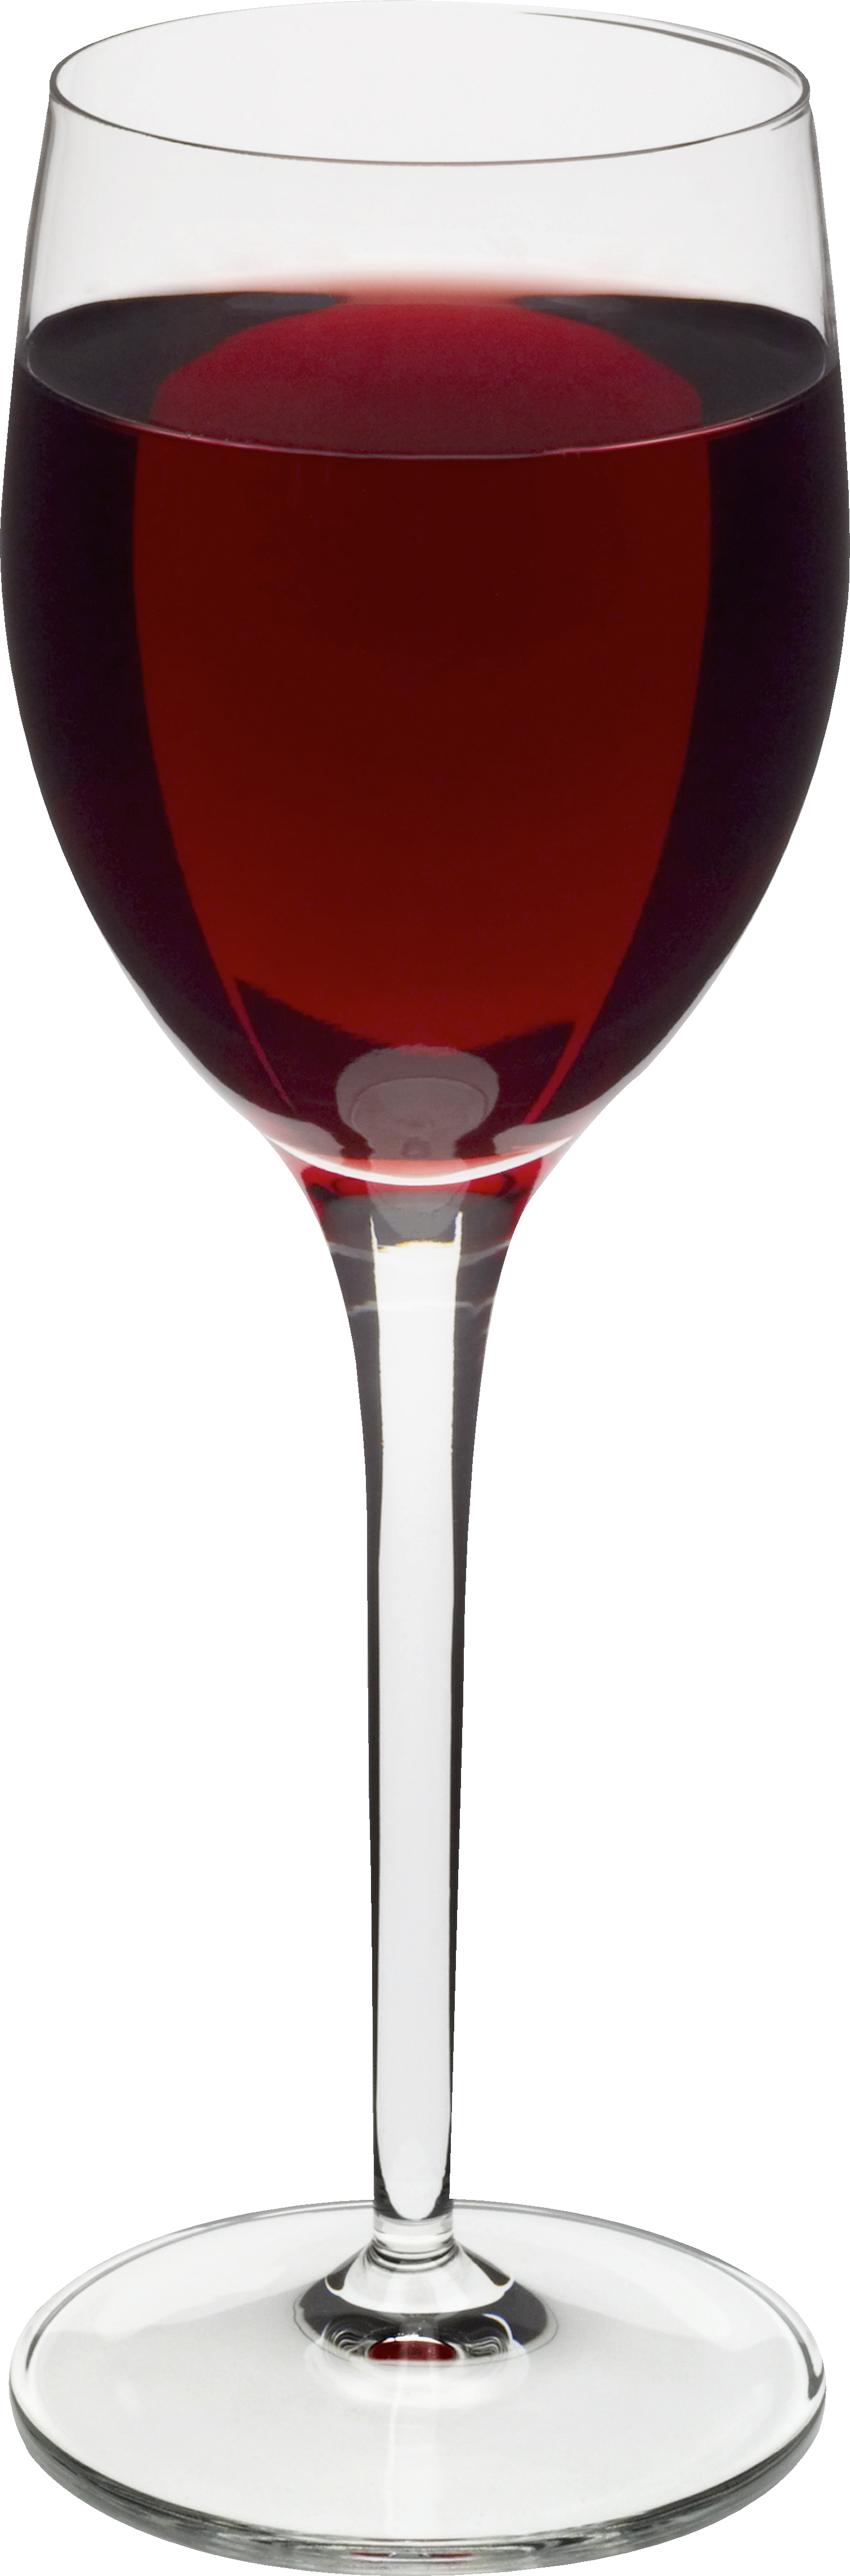 Wine glass clipart no background 